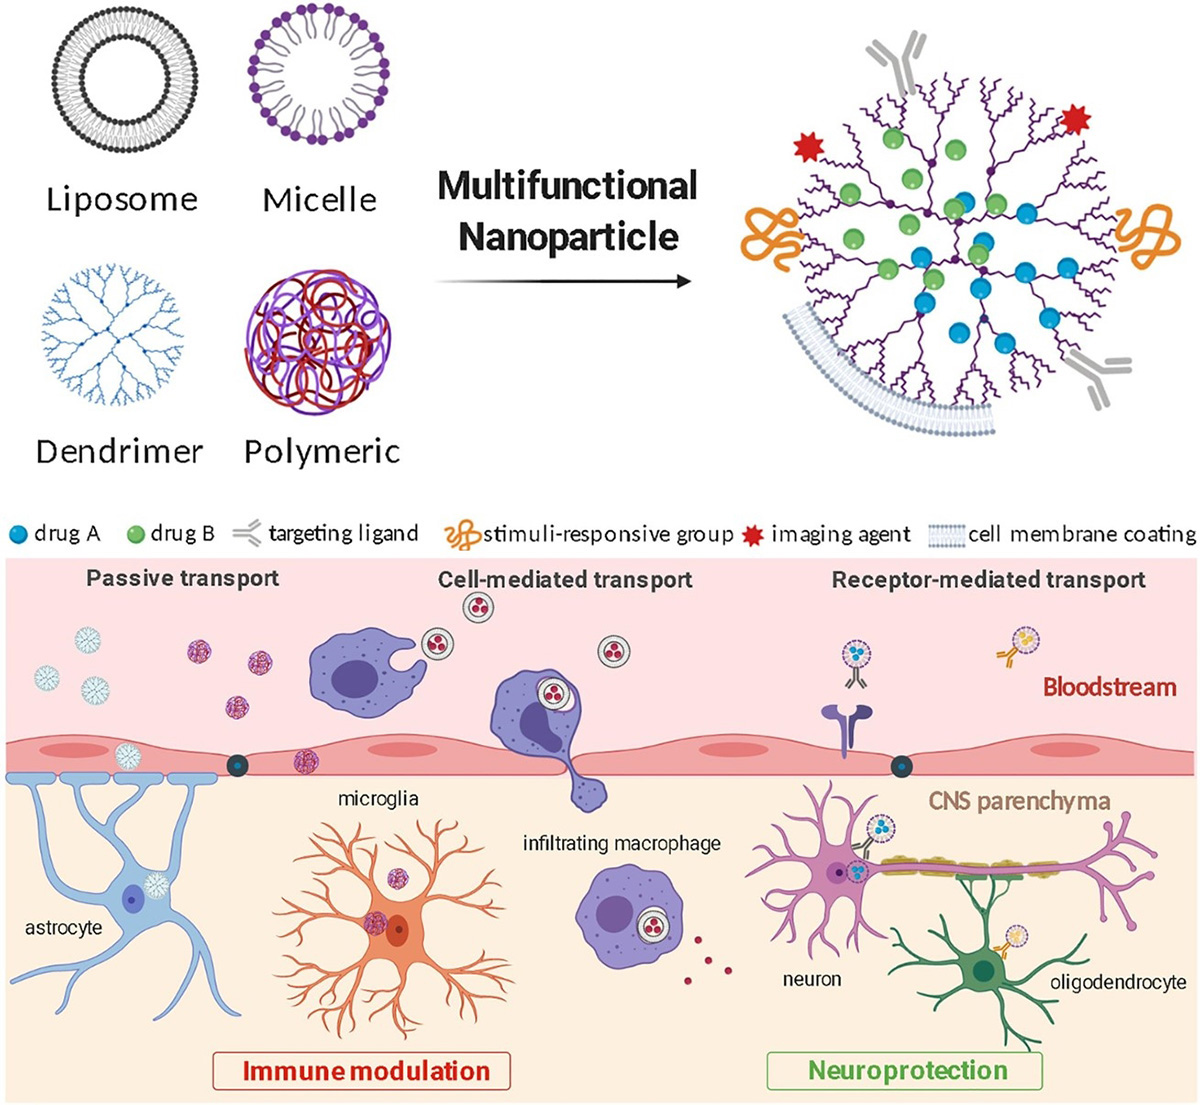 Fig.1 Multifunctional nanoparticles to deliver therapeutics to treat neuroinflammation. (Cerqueira, Susana R., Nagi G. Ayad, and Jae K. Lee, 2020)